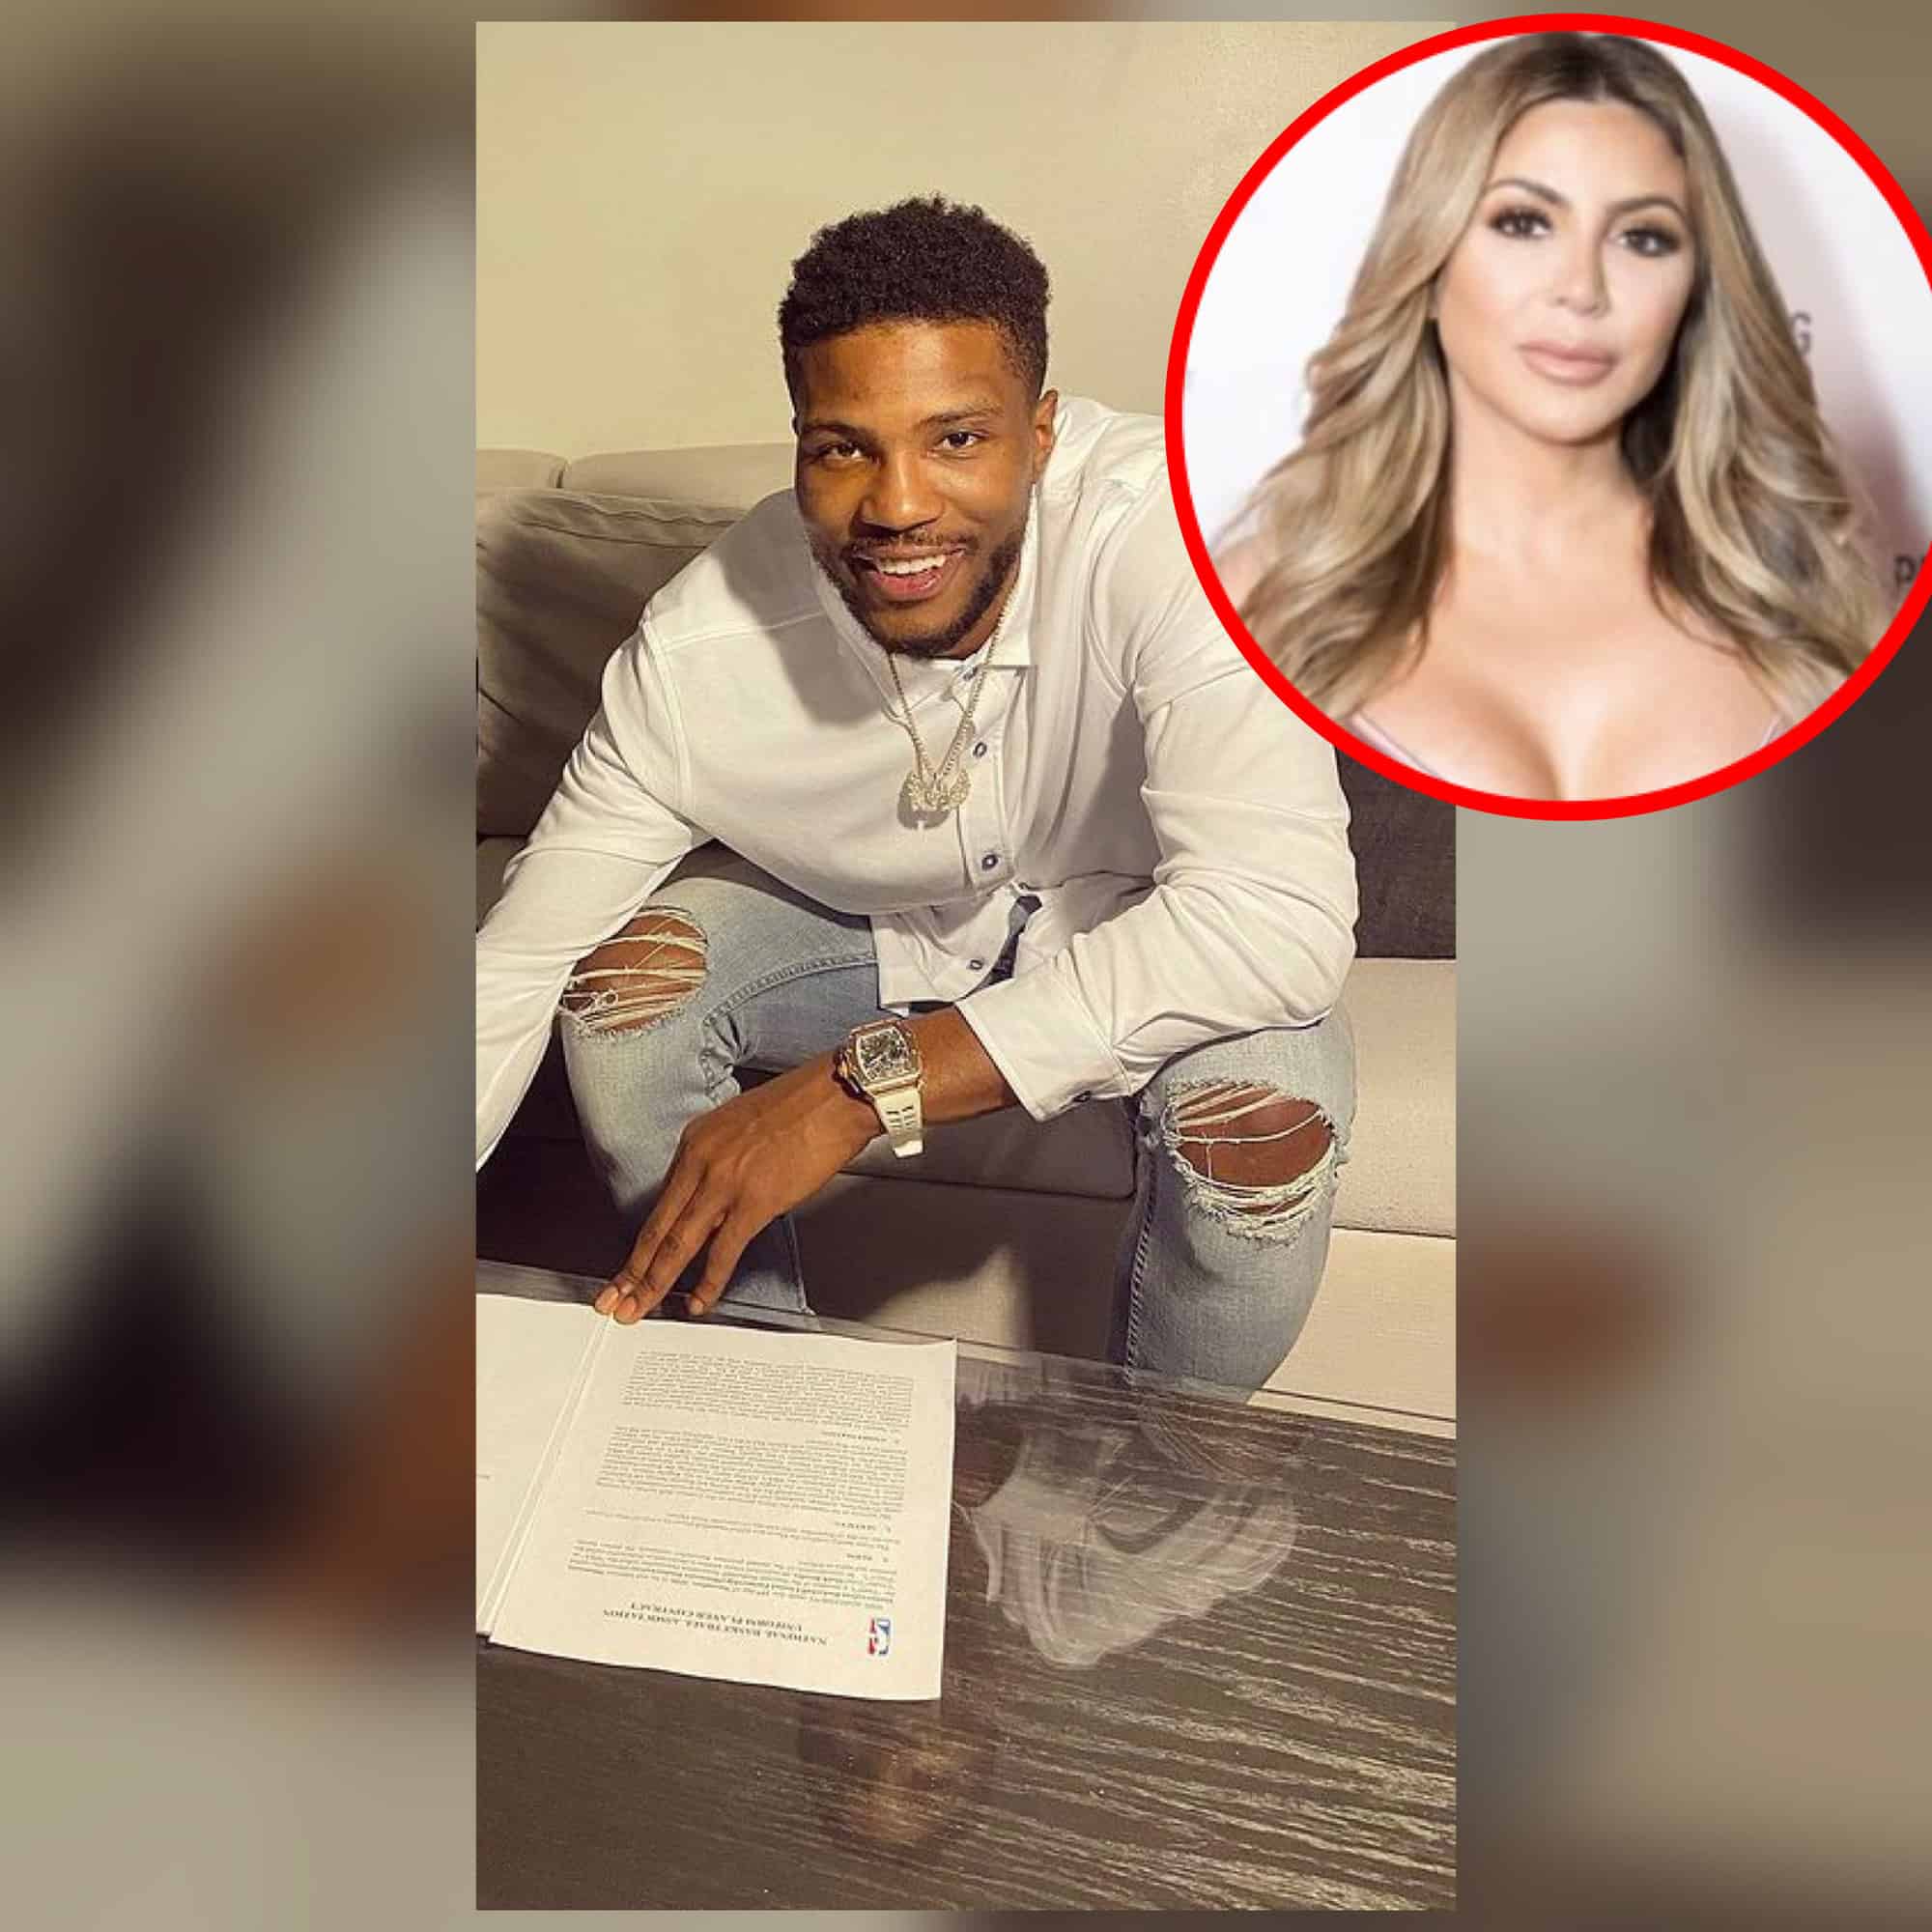 Larsa Pippen Claps Back With Instagram Post After Being Spotted With Married Malik Beasley—“Don’t Judge Me Until You Know Me”